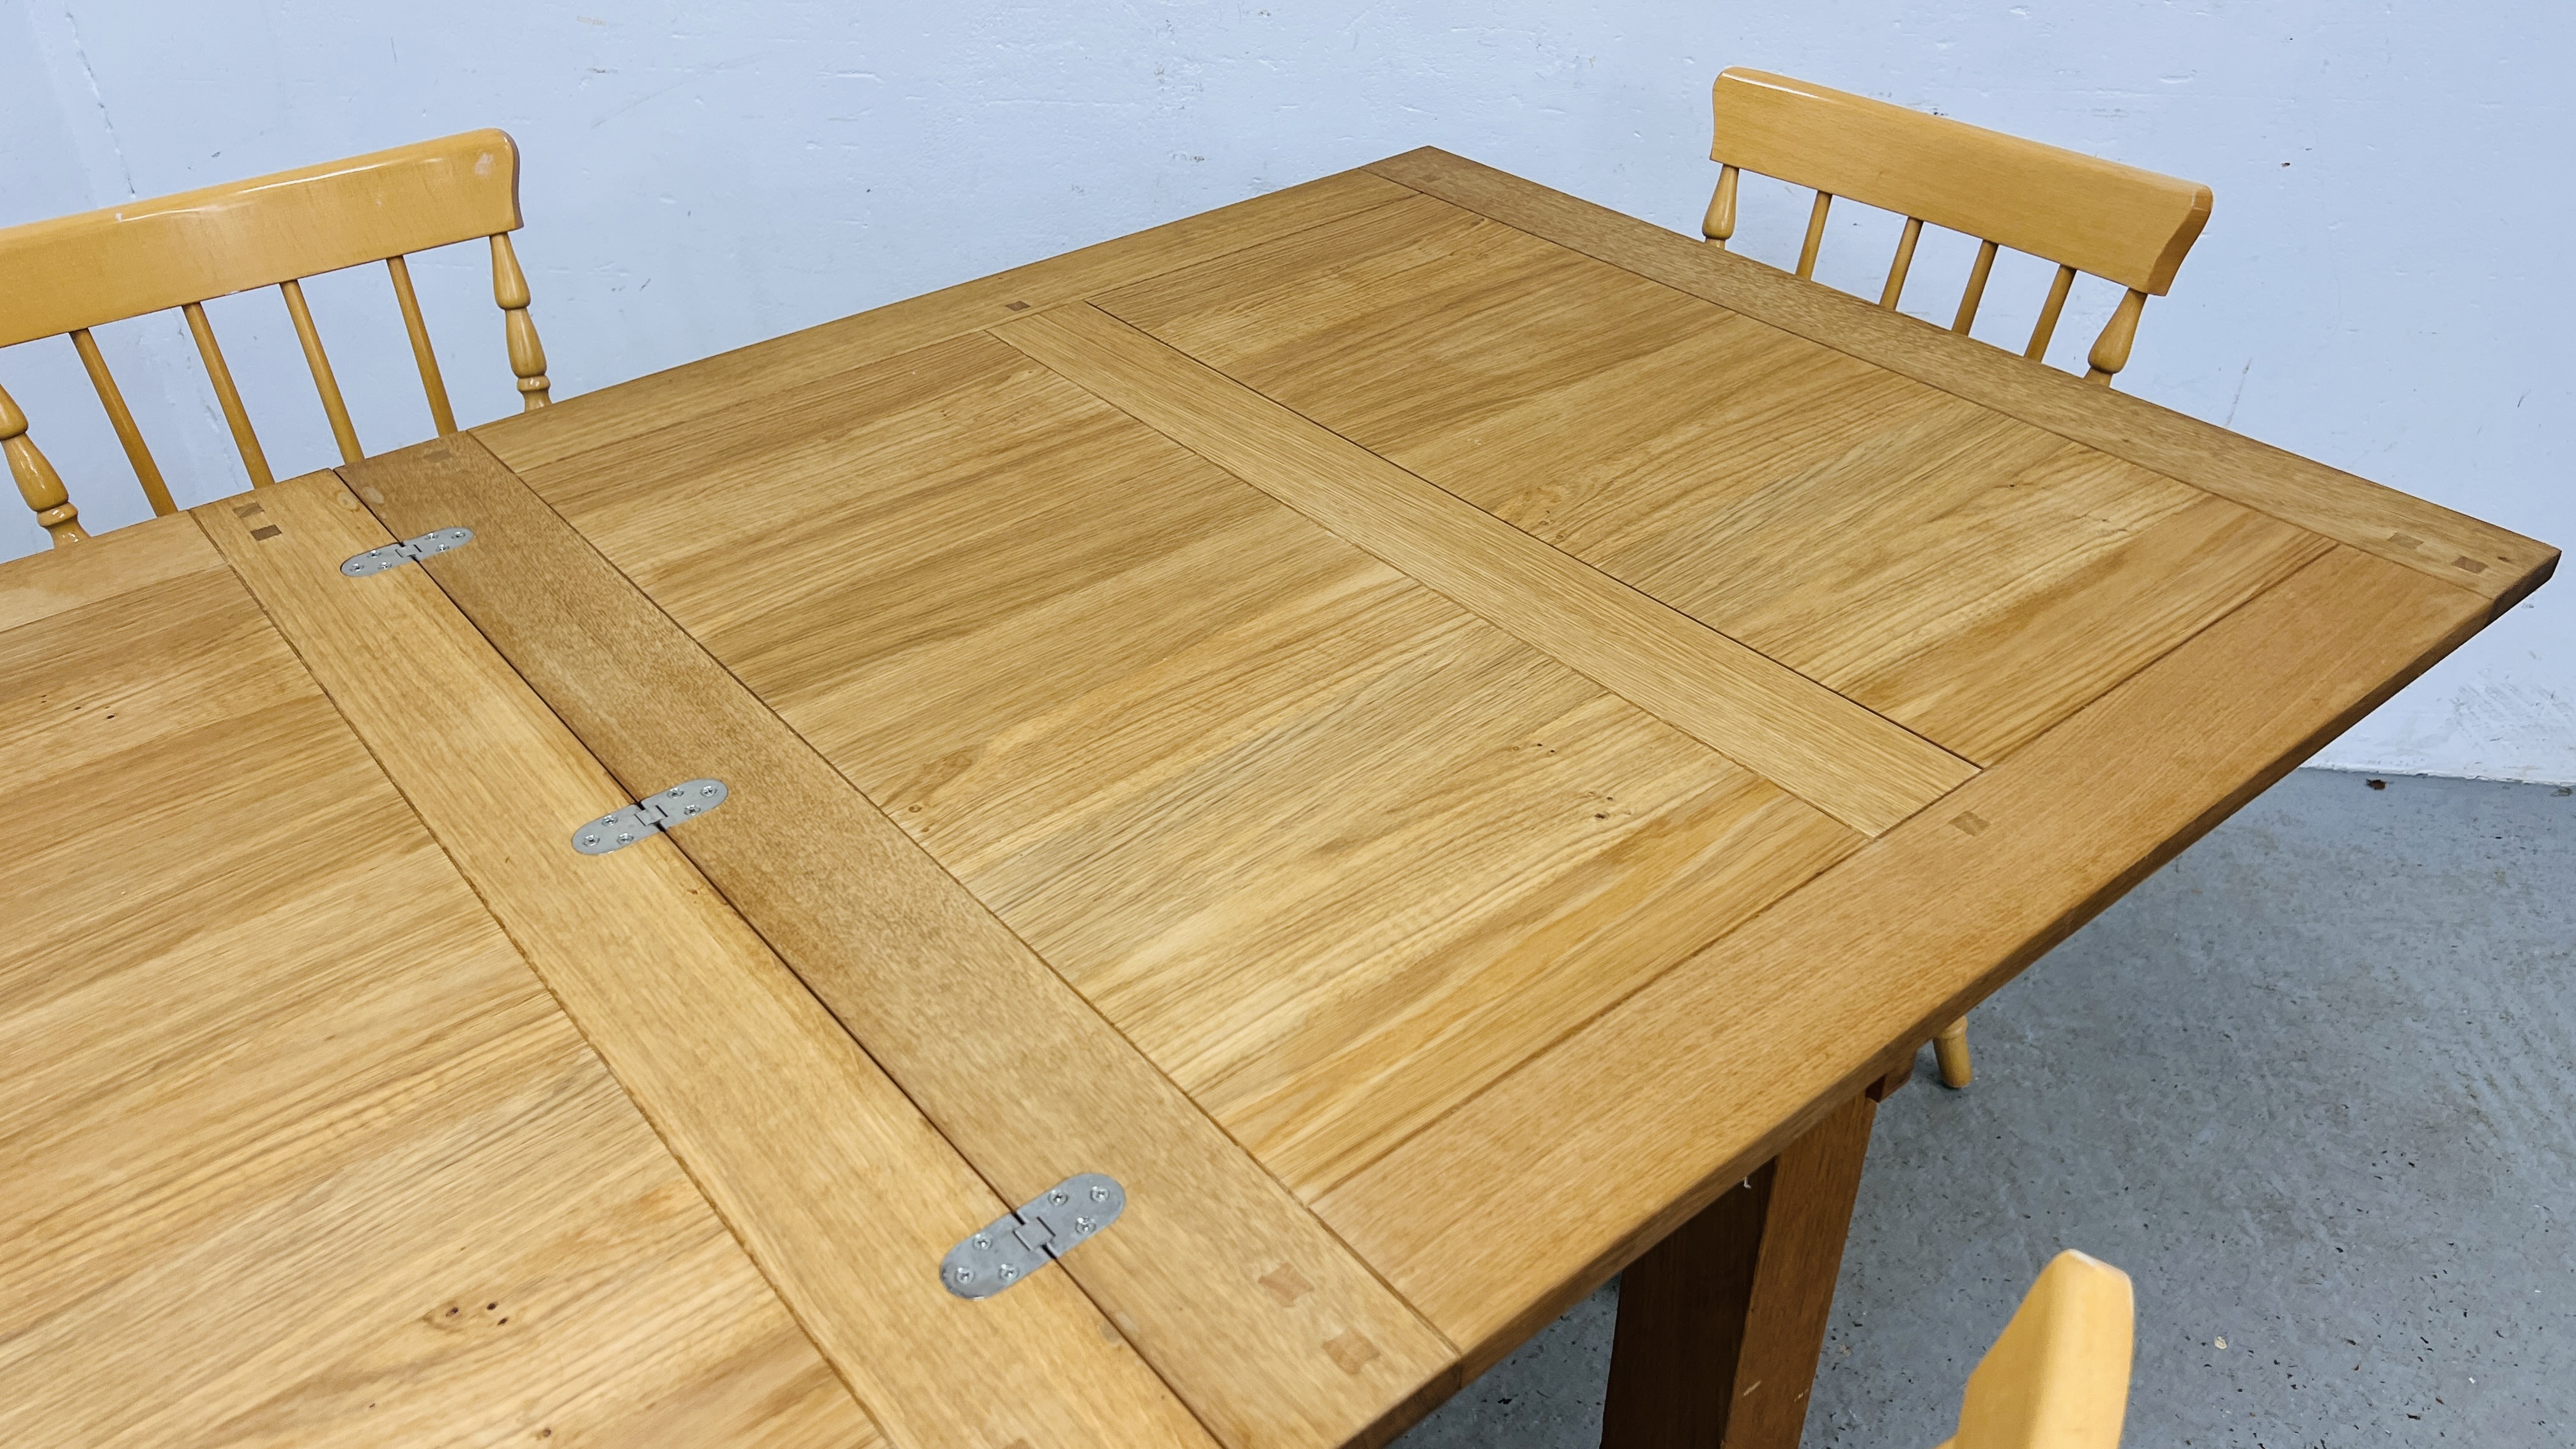 A SOLID OAK EXTENDING DINING TABLE ALONG WITH A SET OF FOUR BEECH WOOD DINING CHAIRS - Image 13 of 14